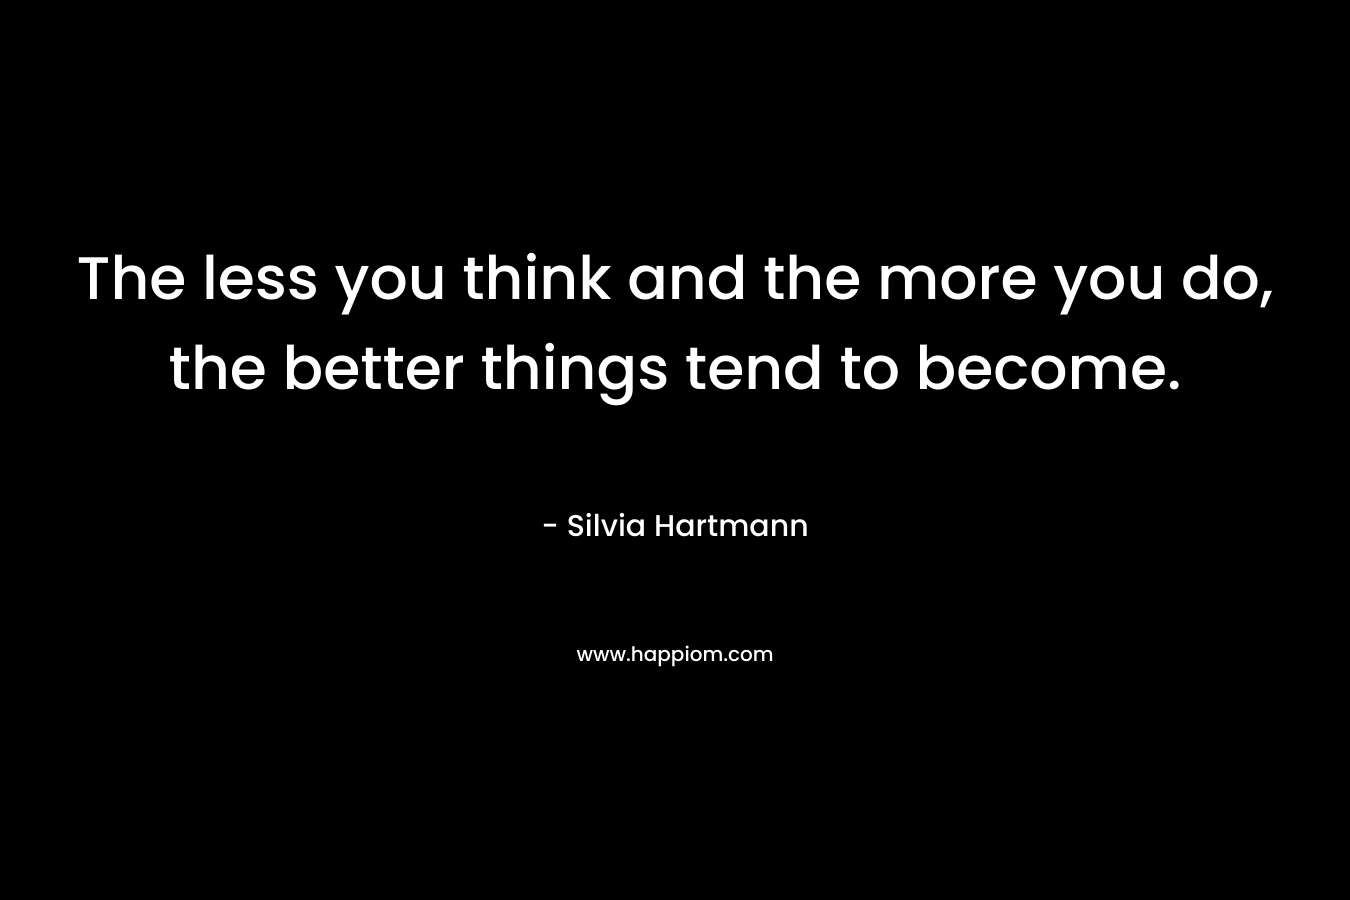 The less you think and the more you do, the better things tend to become.